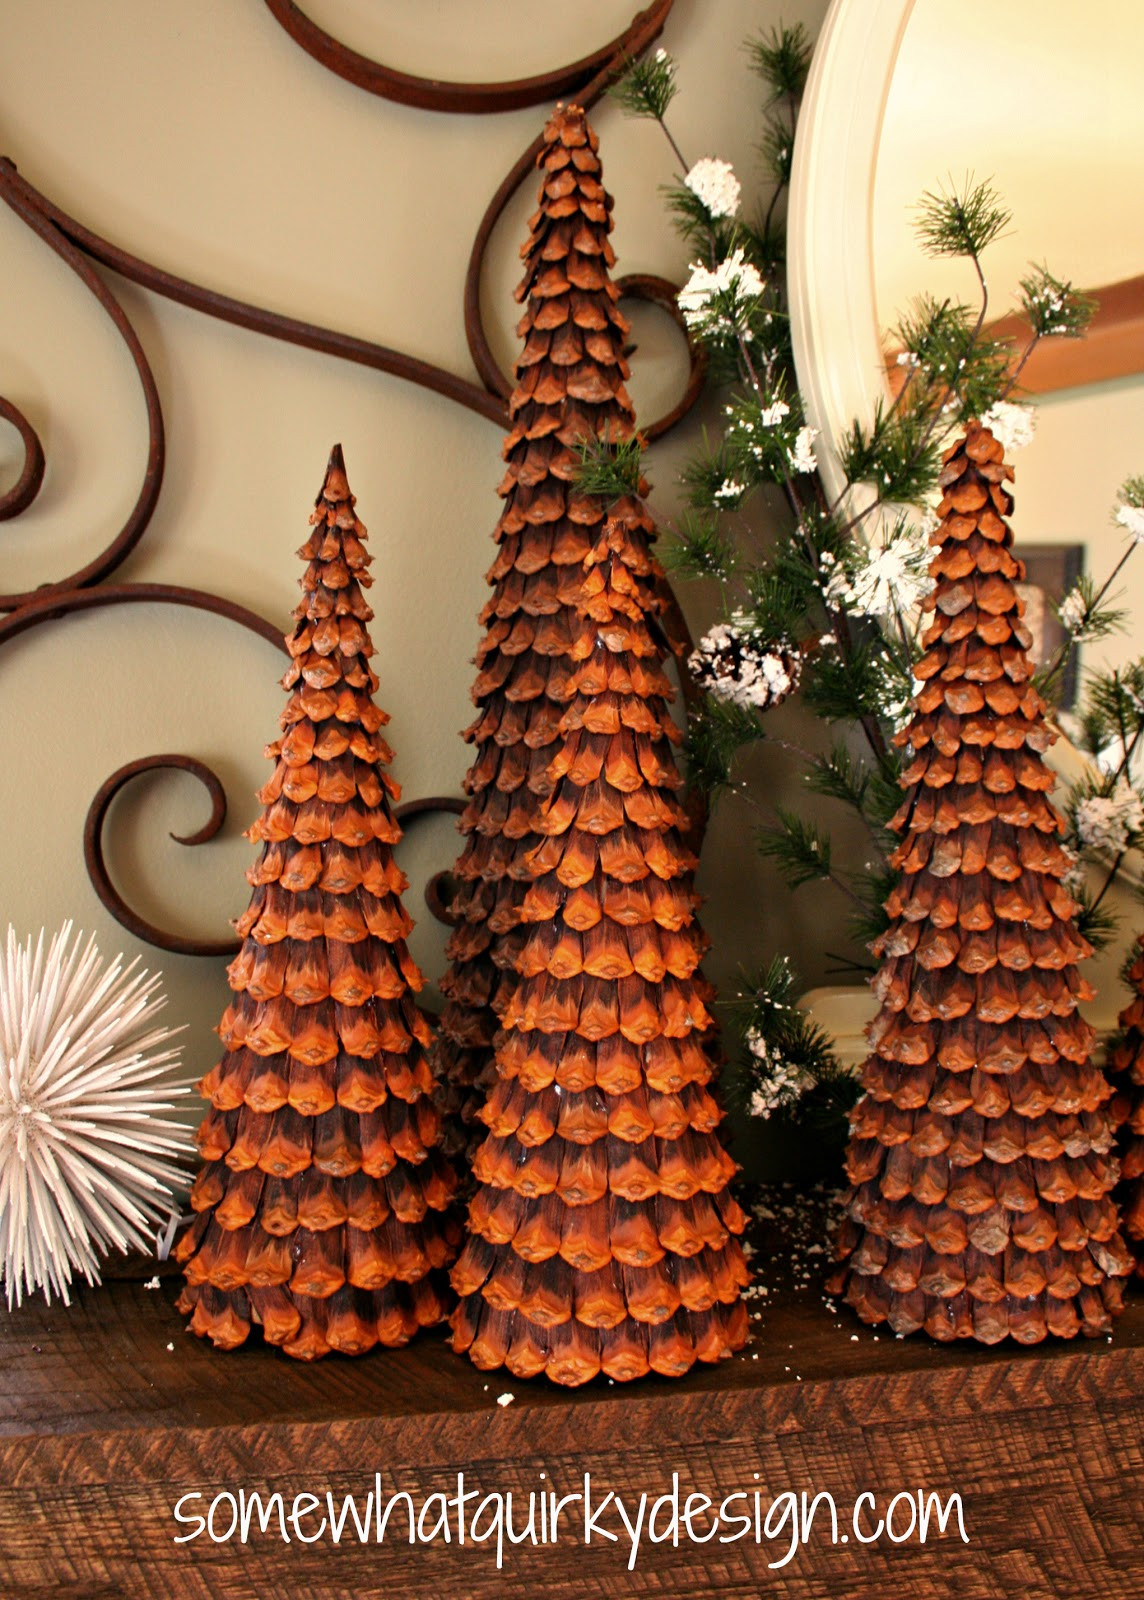 DIY Cone Christmas Trees
 Somewhat Quirky Pine Cone Christmas Trees